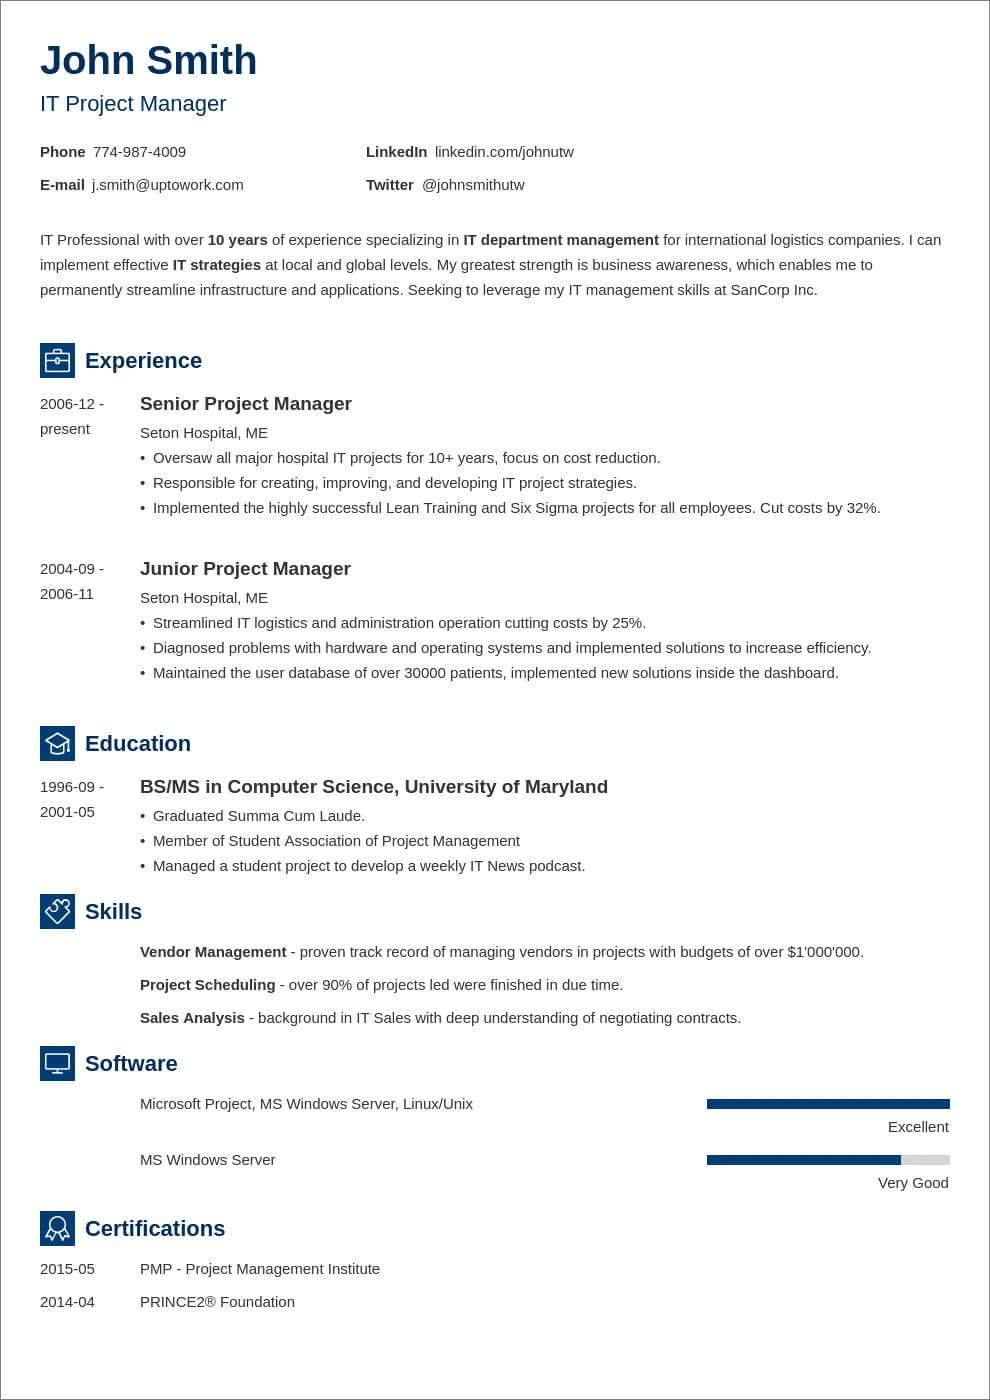 Applicant Tracking System Friendly Resume Template 11 ats-friendly Resume Templates that Beat the Bots In 2021